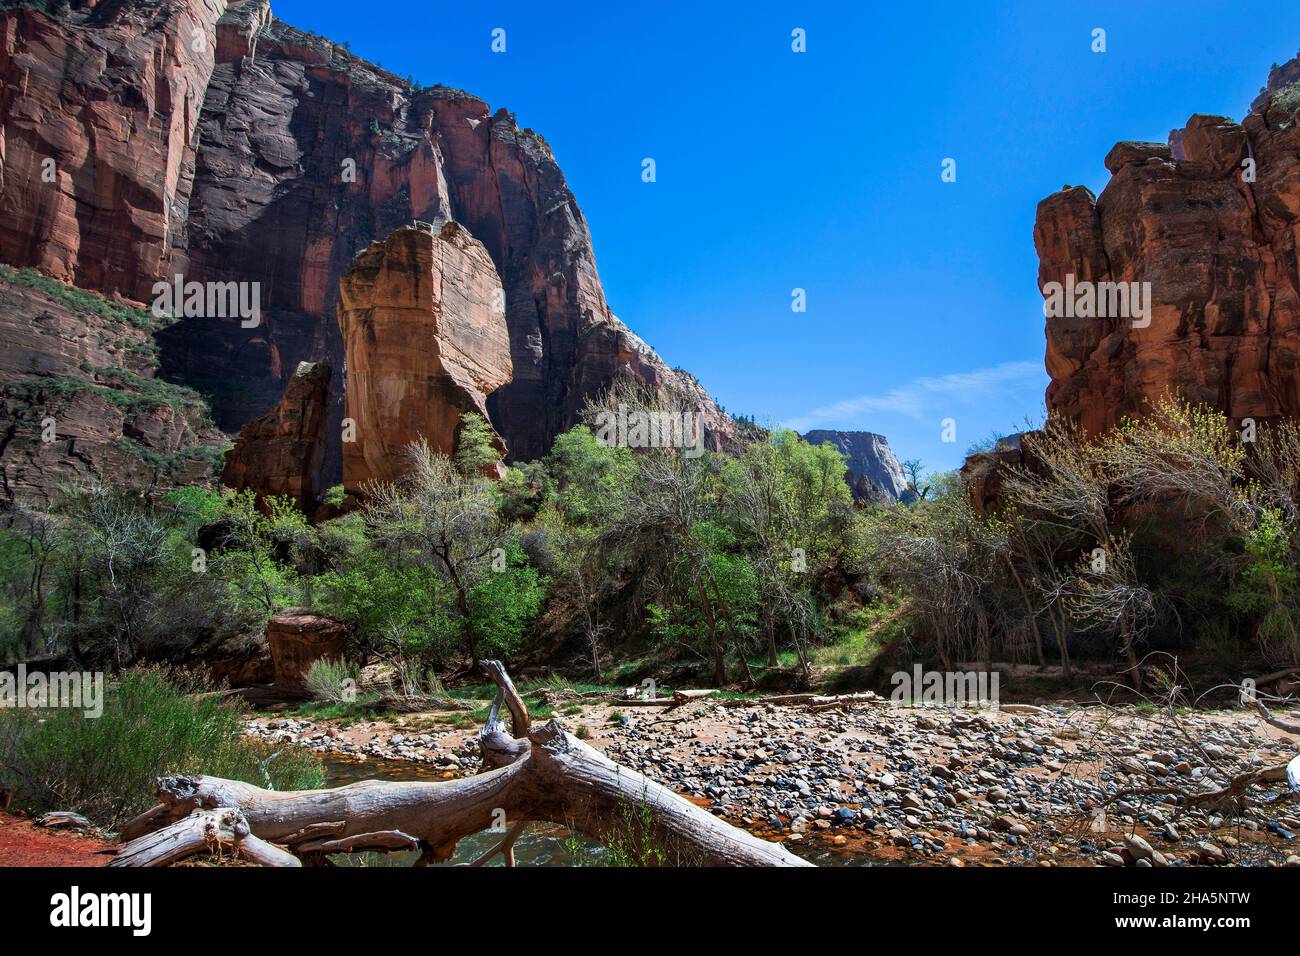 Temple of Sinawava Trail follows the Virgin River upstream through ever-narrowing canyons, Zion National Park, Utah Stock Photo